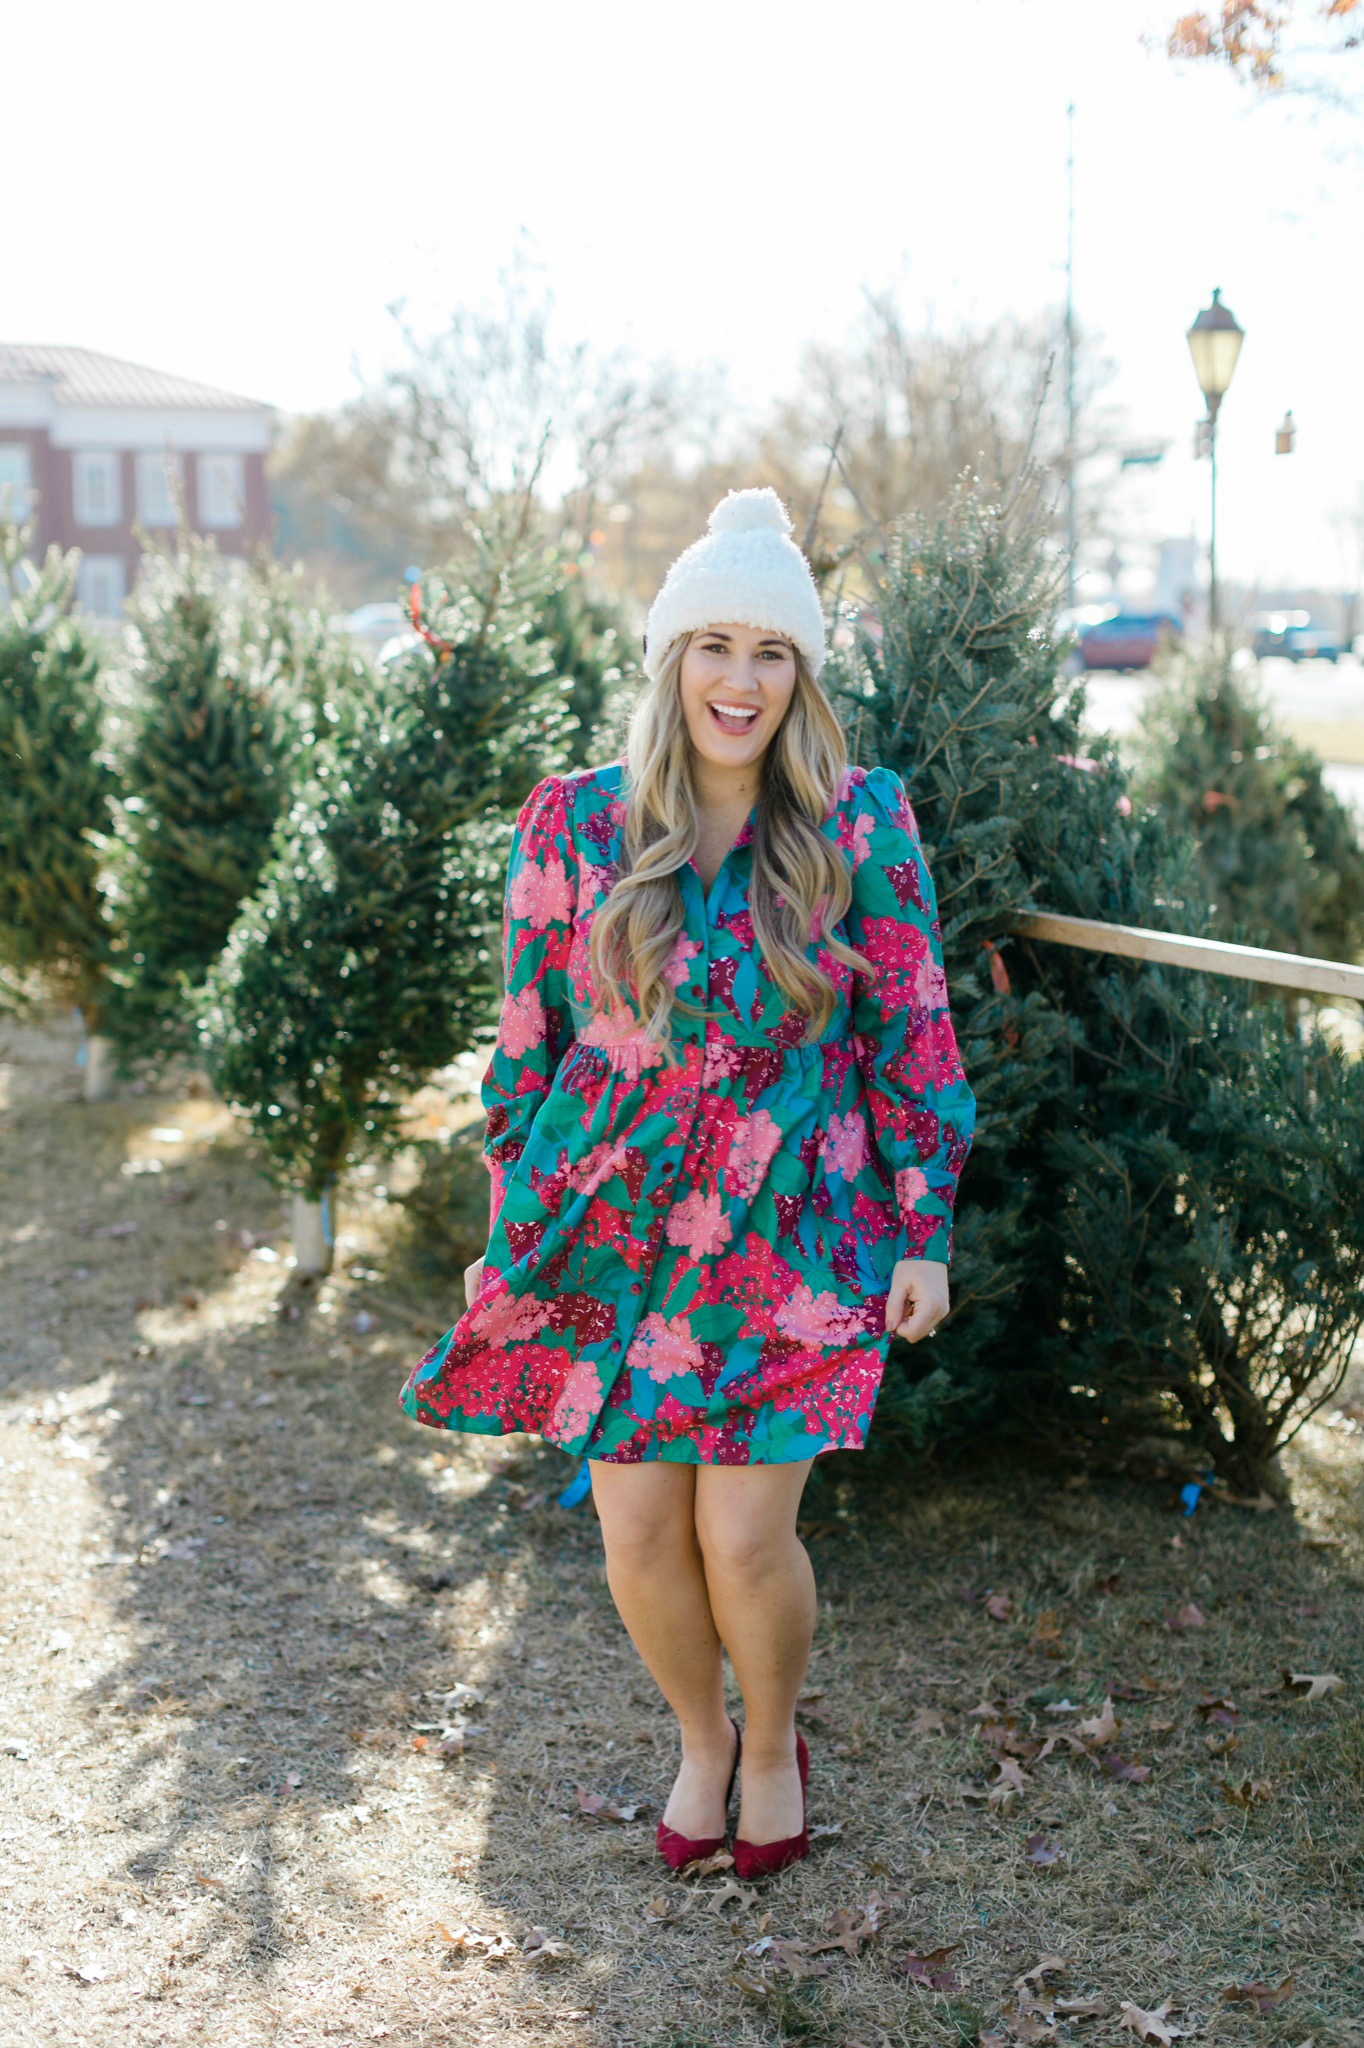 Winter floral look styled by top Memphis fashion blogger, Walking in Memphis in High Heels: image of a woman wearing a Tuckernuck floral shirt dress, Vince Camuto Selindra pumps and MUK LUKS pom hat.